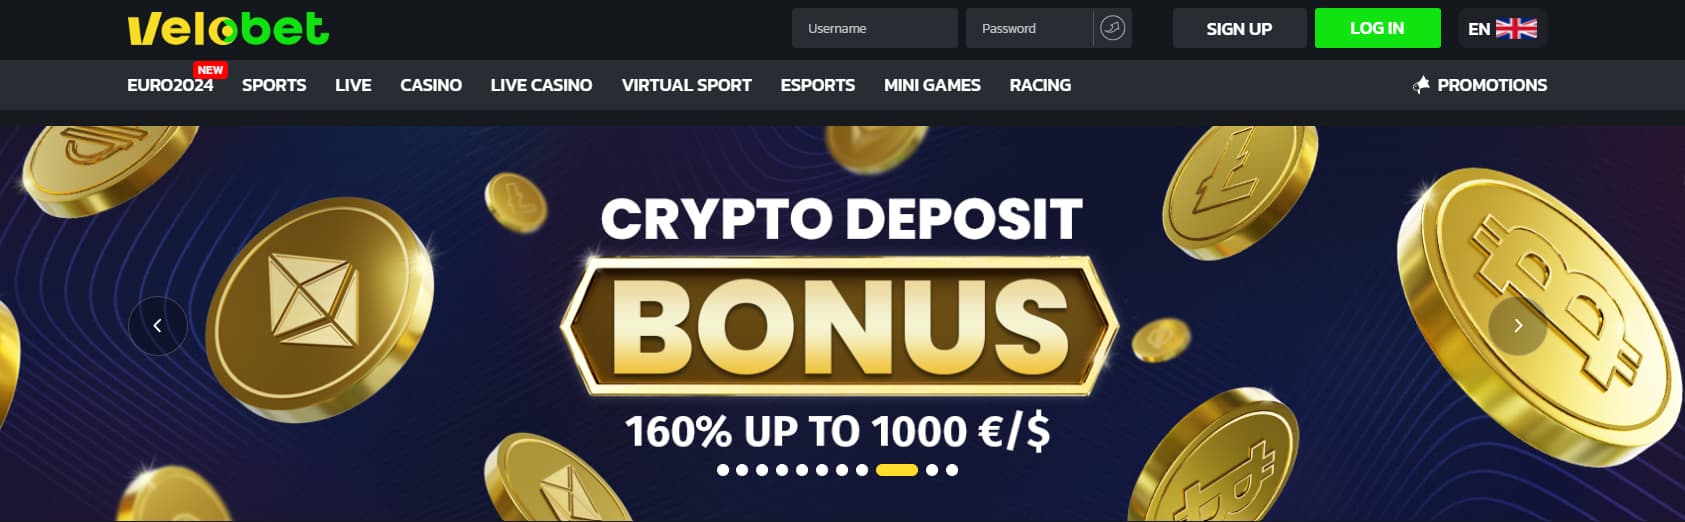 overview of velobet casino